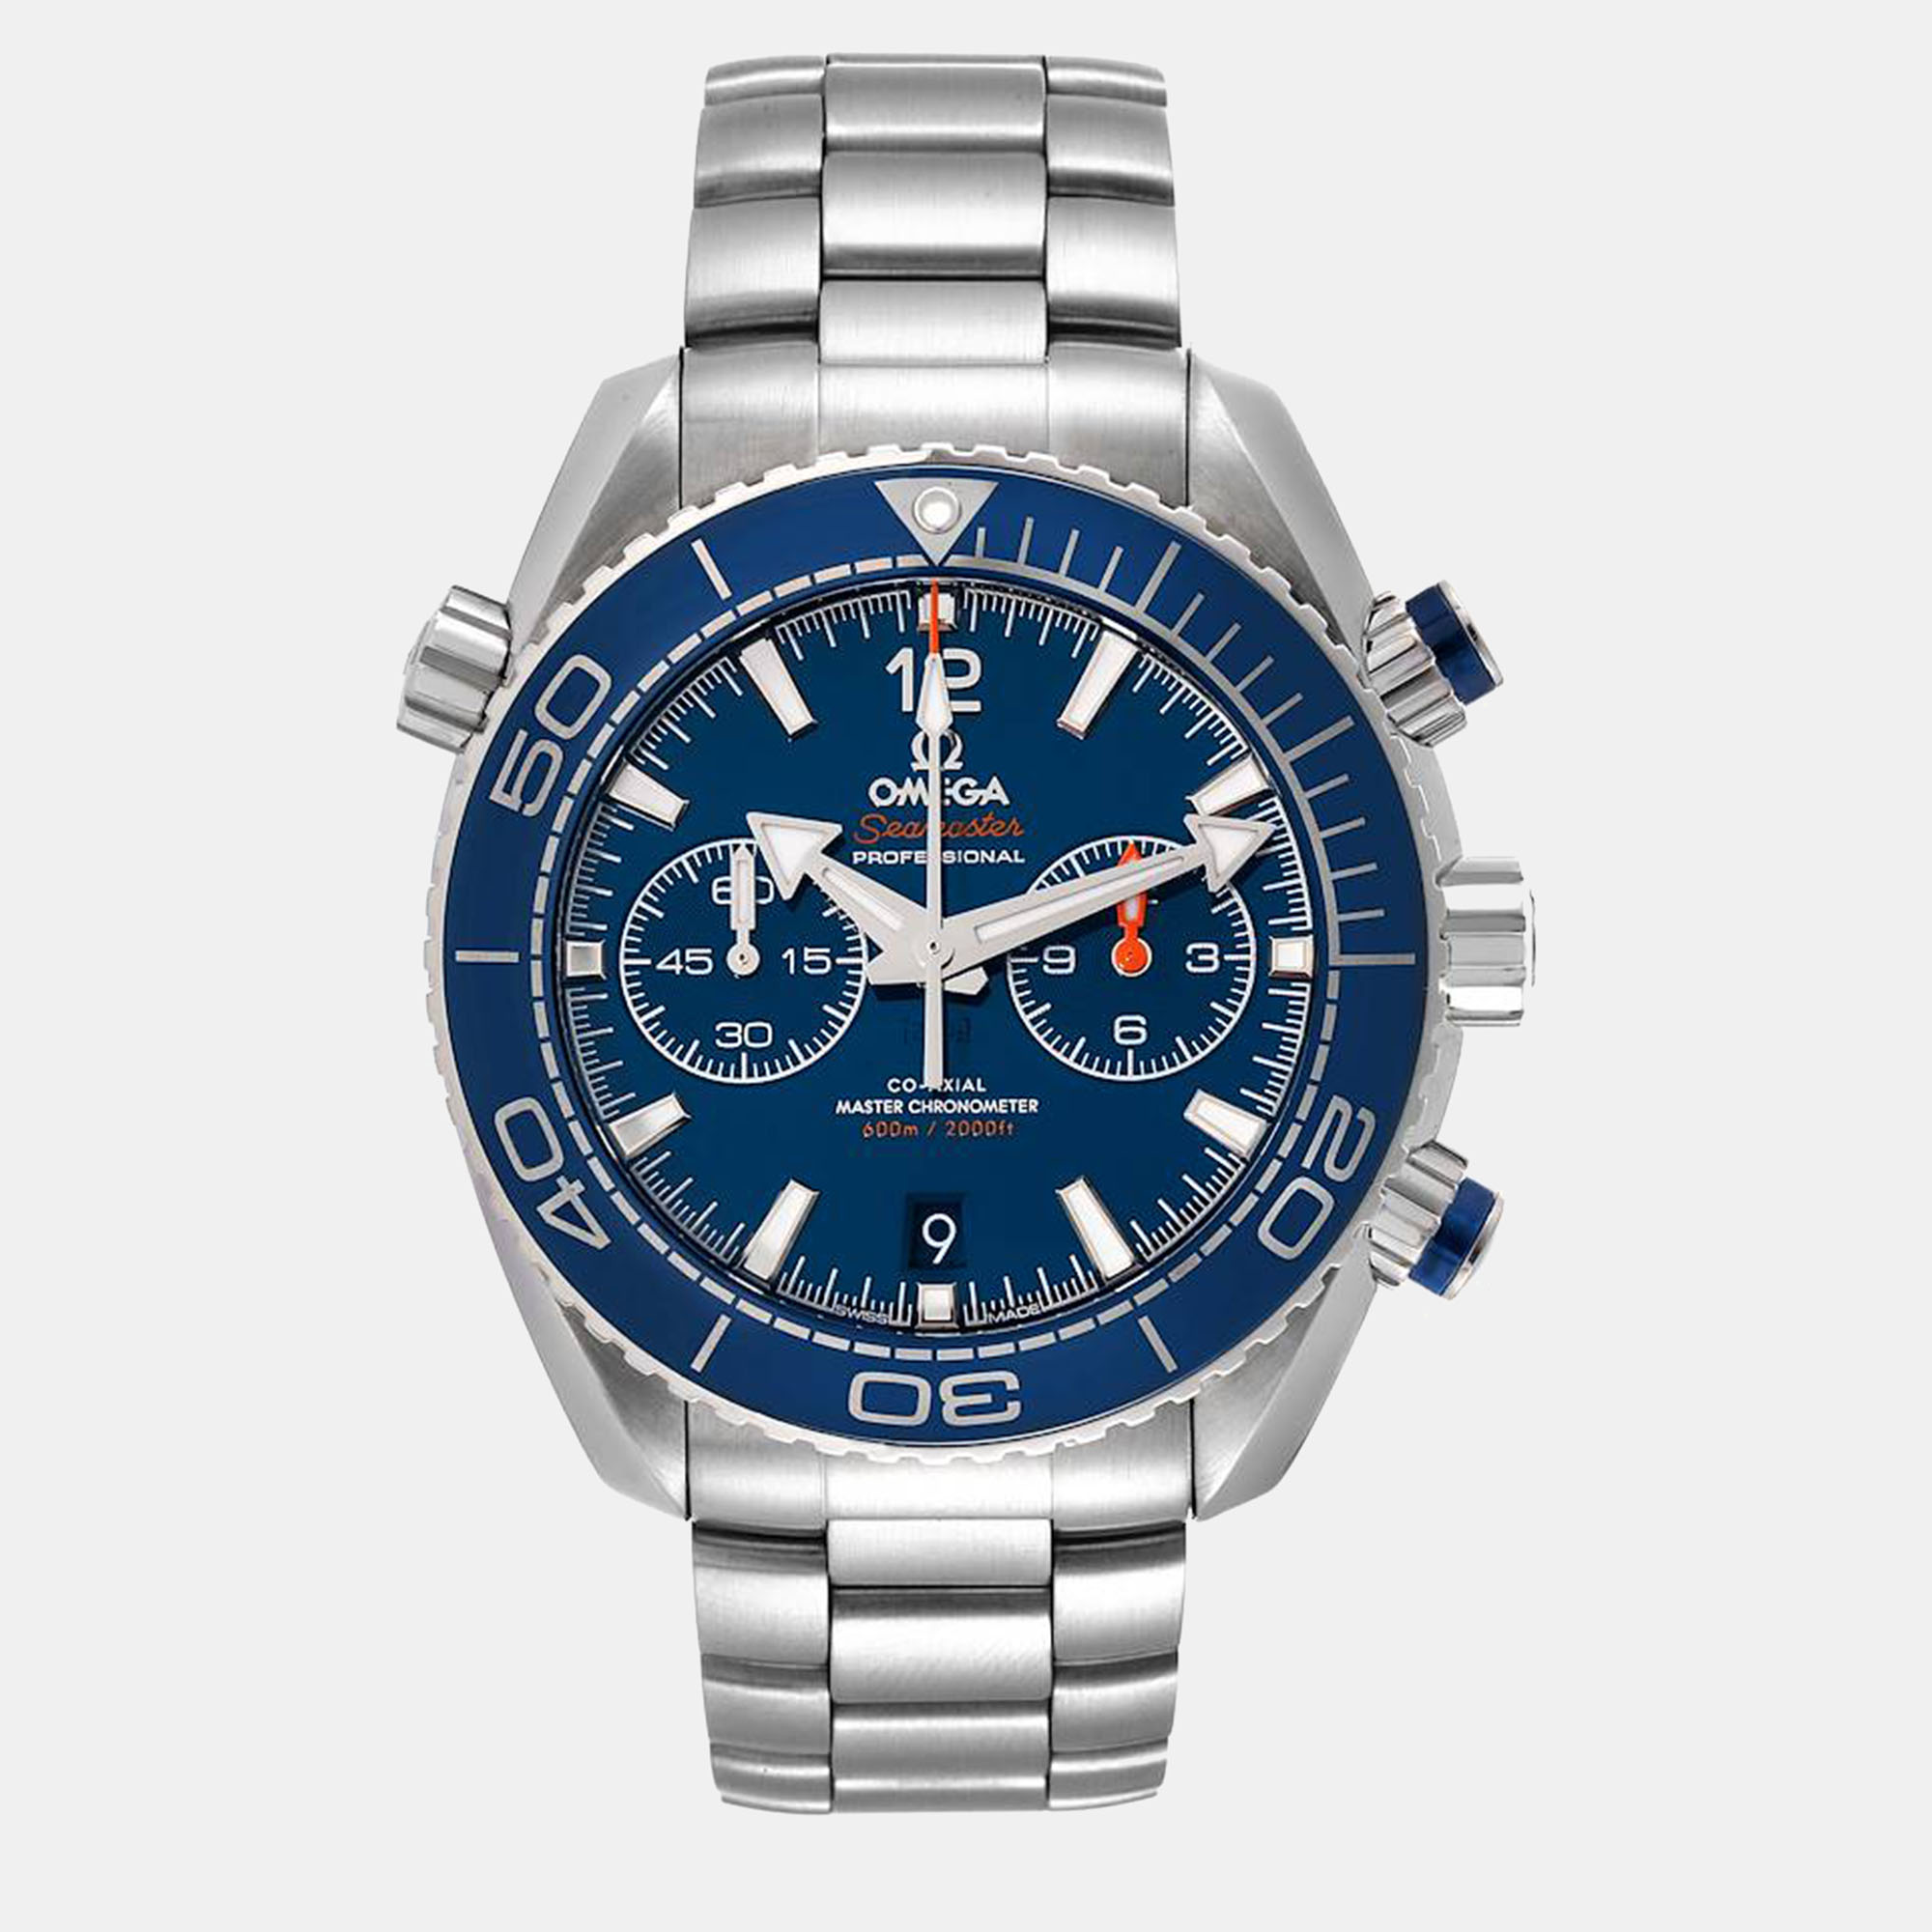 Omega blue stainless steel seamaster planet ocean 215.30.46.51.03.001 automatic men's wristwatch 45.5 mm